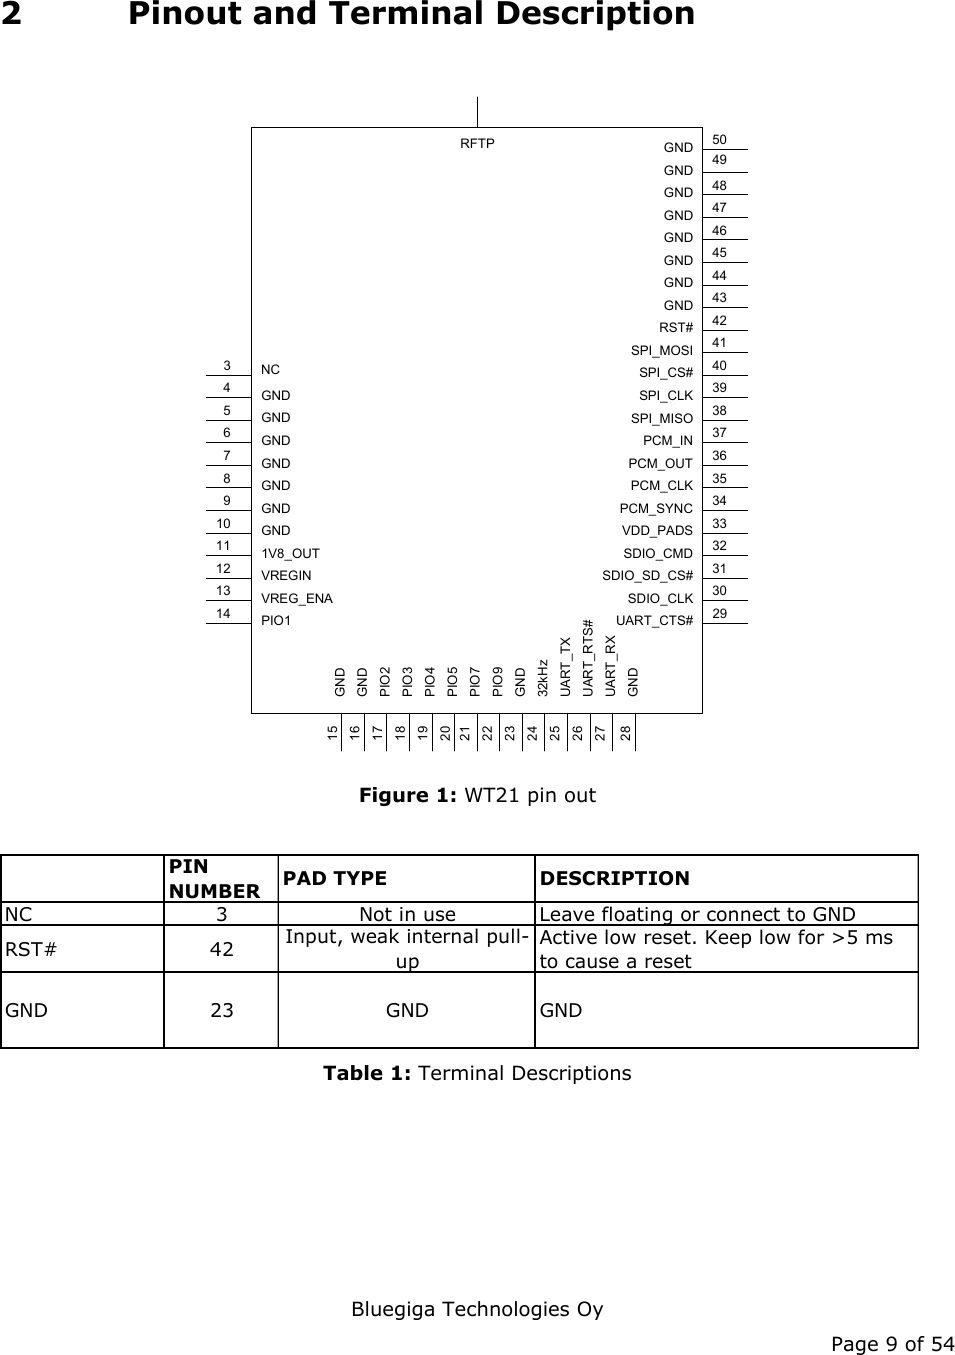   Bluegiga Technologies Oy Page 9 of 54 2 Pinout and Terminal Description 1V8_OUTVREGINVREG_ENAPIO1GNDGNDGNDGNDGNDGNDGNDGNDPIO2PIO3PIO4PIO5PIO7PIO9GND32kHzUART_TXUART_RTS#UART_RXGNDGNDUART_CTS#SDIO_CLKSDIO_SD_CS#SDIO_CMDVDD_PADSPCM_SYNCPCM_CLKPCM_OUTPCM_INSPI_MISOSPI_CLKSPI_CS#SPI_MOSIRST#GNDGNDGNDGNDGNDGNDGNDGNDRFTP45678910111213141516171819202122232425262728293031323334353637383940414243444546474849503NC Figure 1: WT21 pin out  PIN NUMBER PAD TYPE DESCRIPTIONNC 3 Not in use Leave floating or connect to GNDRST# 42 Input, weak internal pull-upActive low reset. Keep low for &gt;5 ms to cause a resetGND 23 GND GND Table 1: Terminal Descriptions 